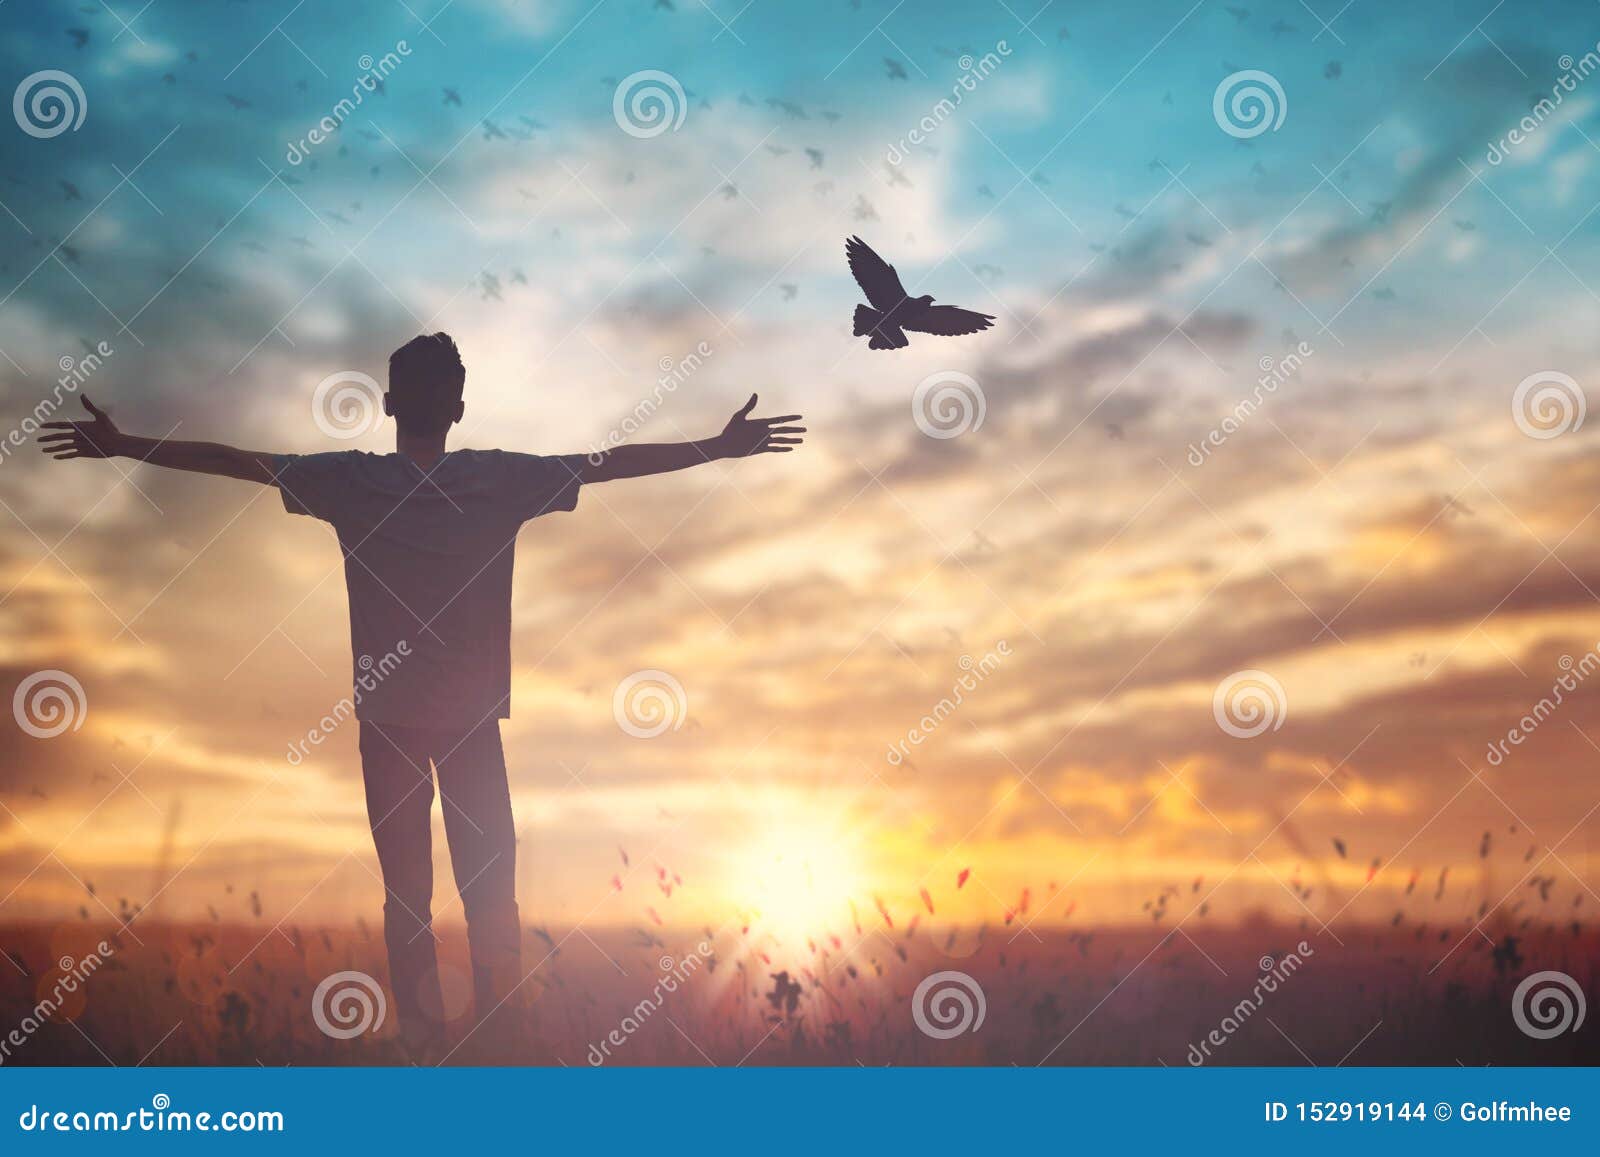 happy man rise hand on morning view. christian inspire praise god on good friday background. male self confidence empowerment on